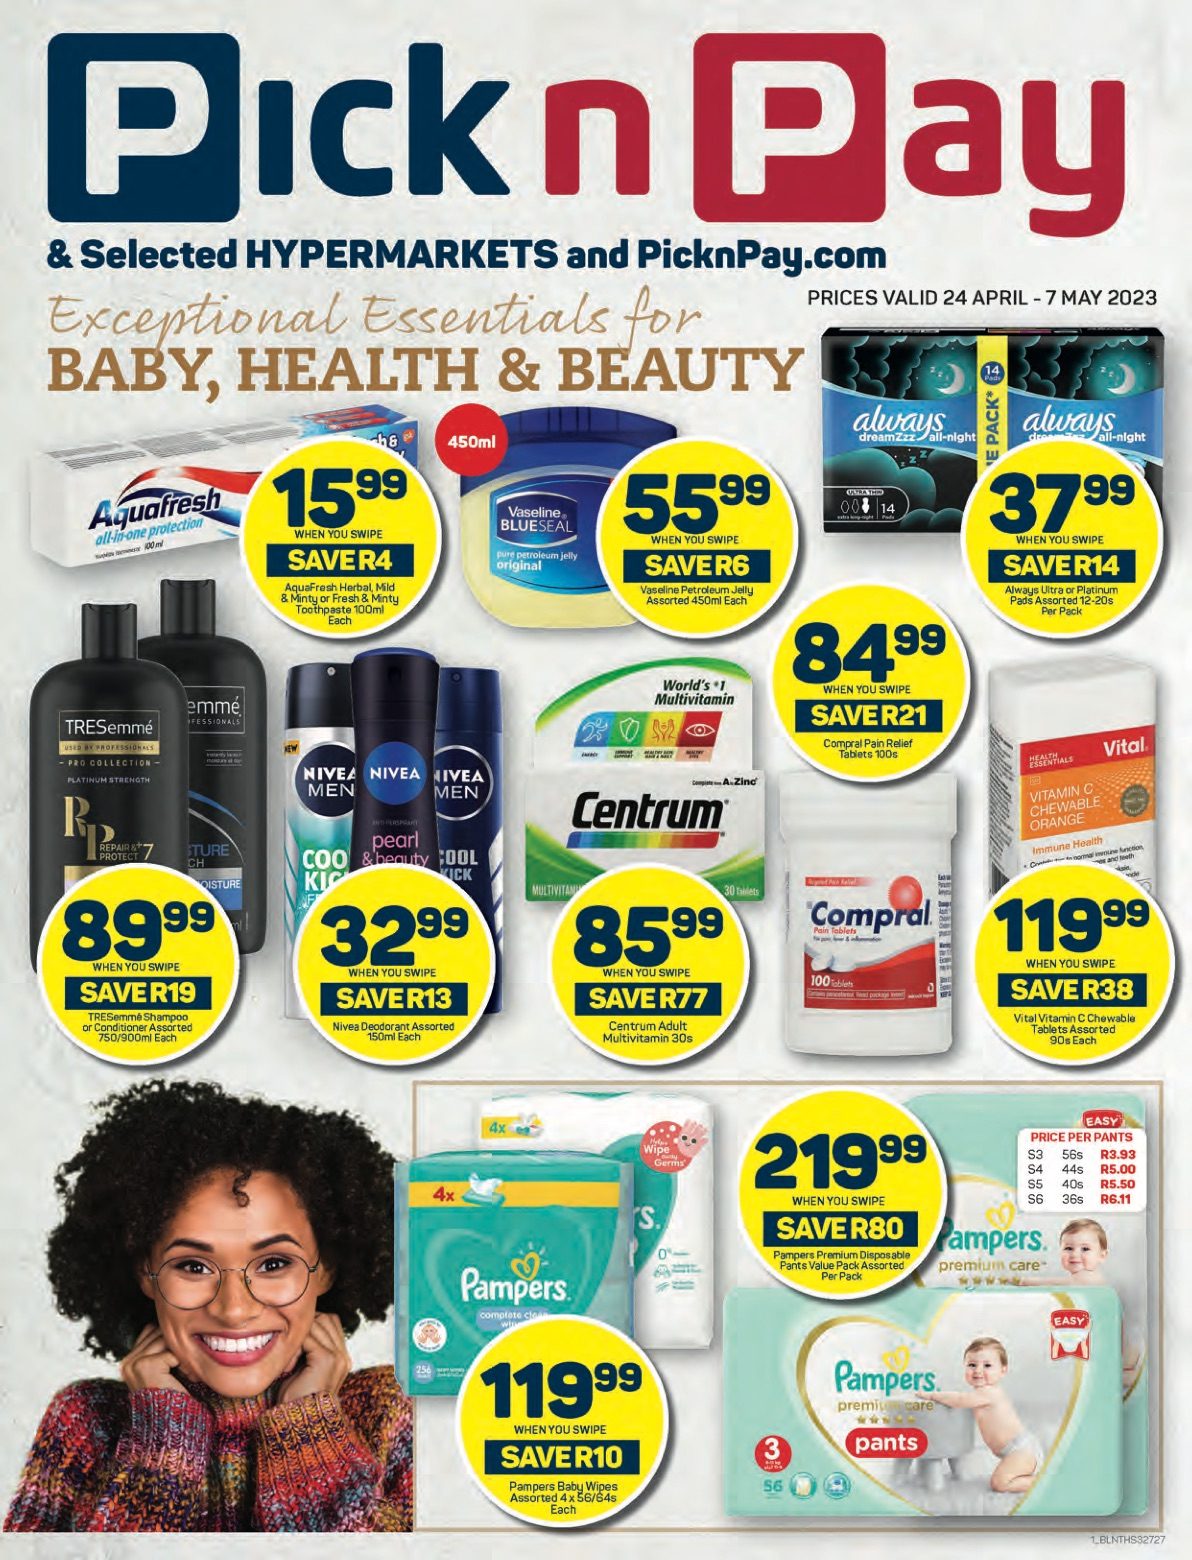 Pick n Pay Specials Health and Beauty 24 Apr – 7 May 2023